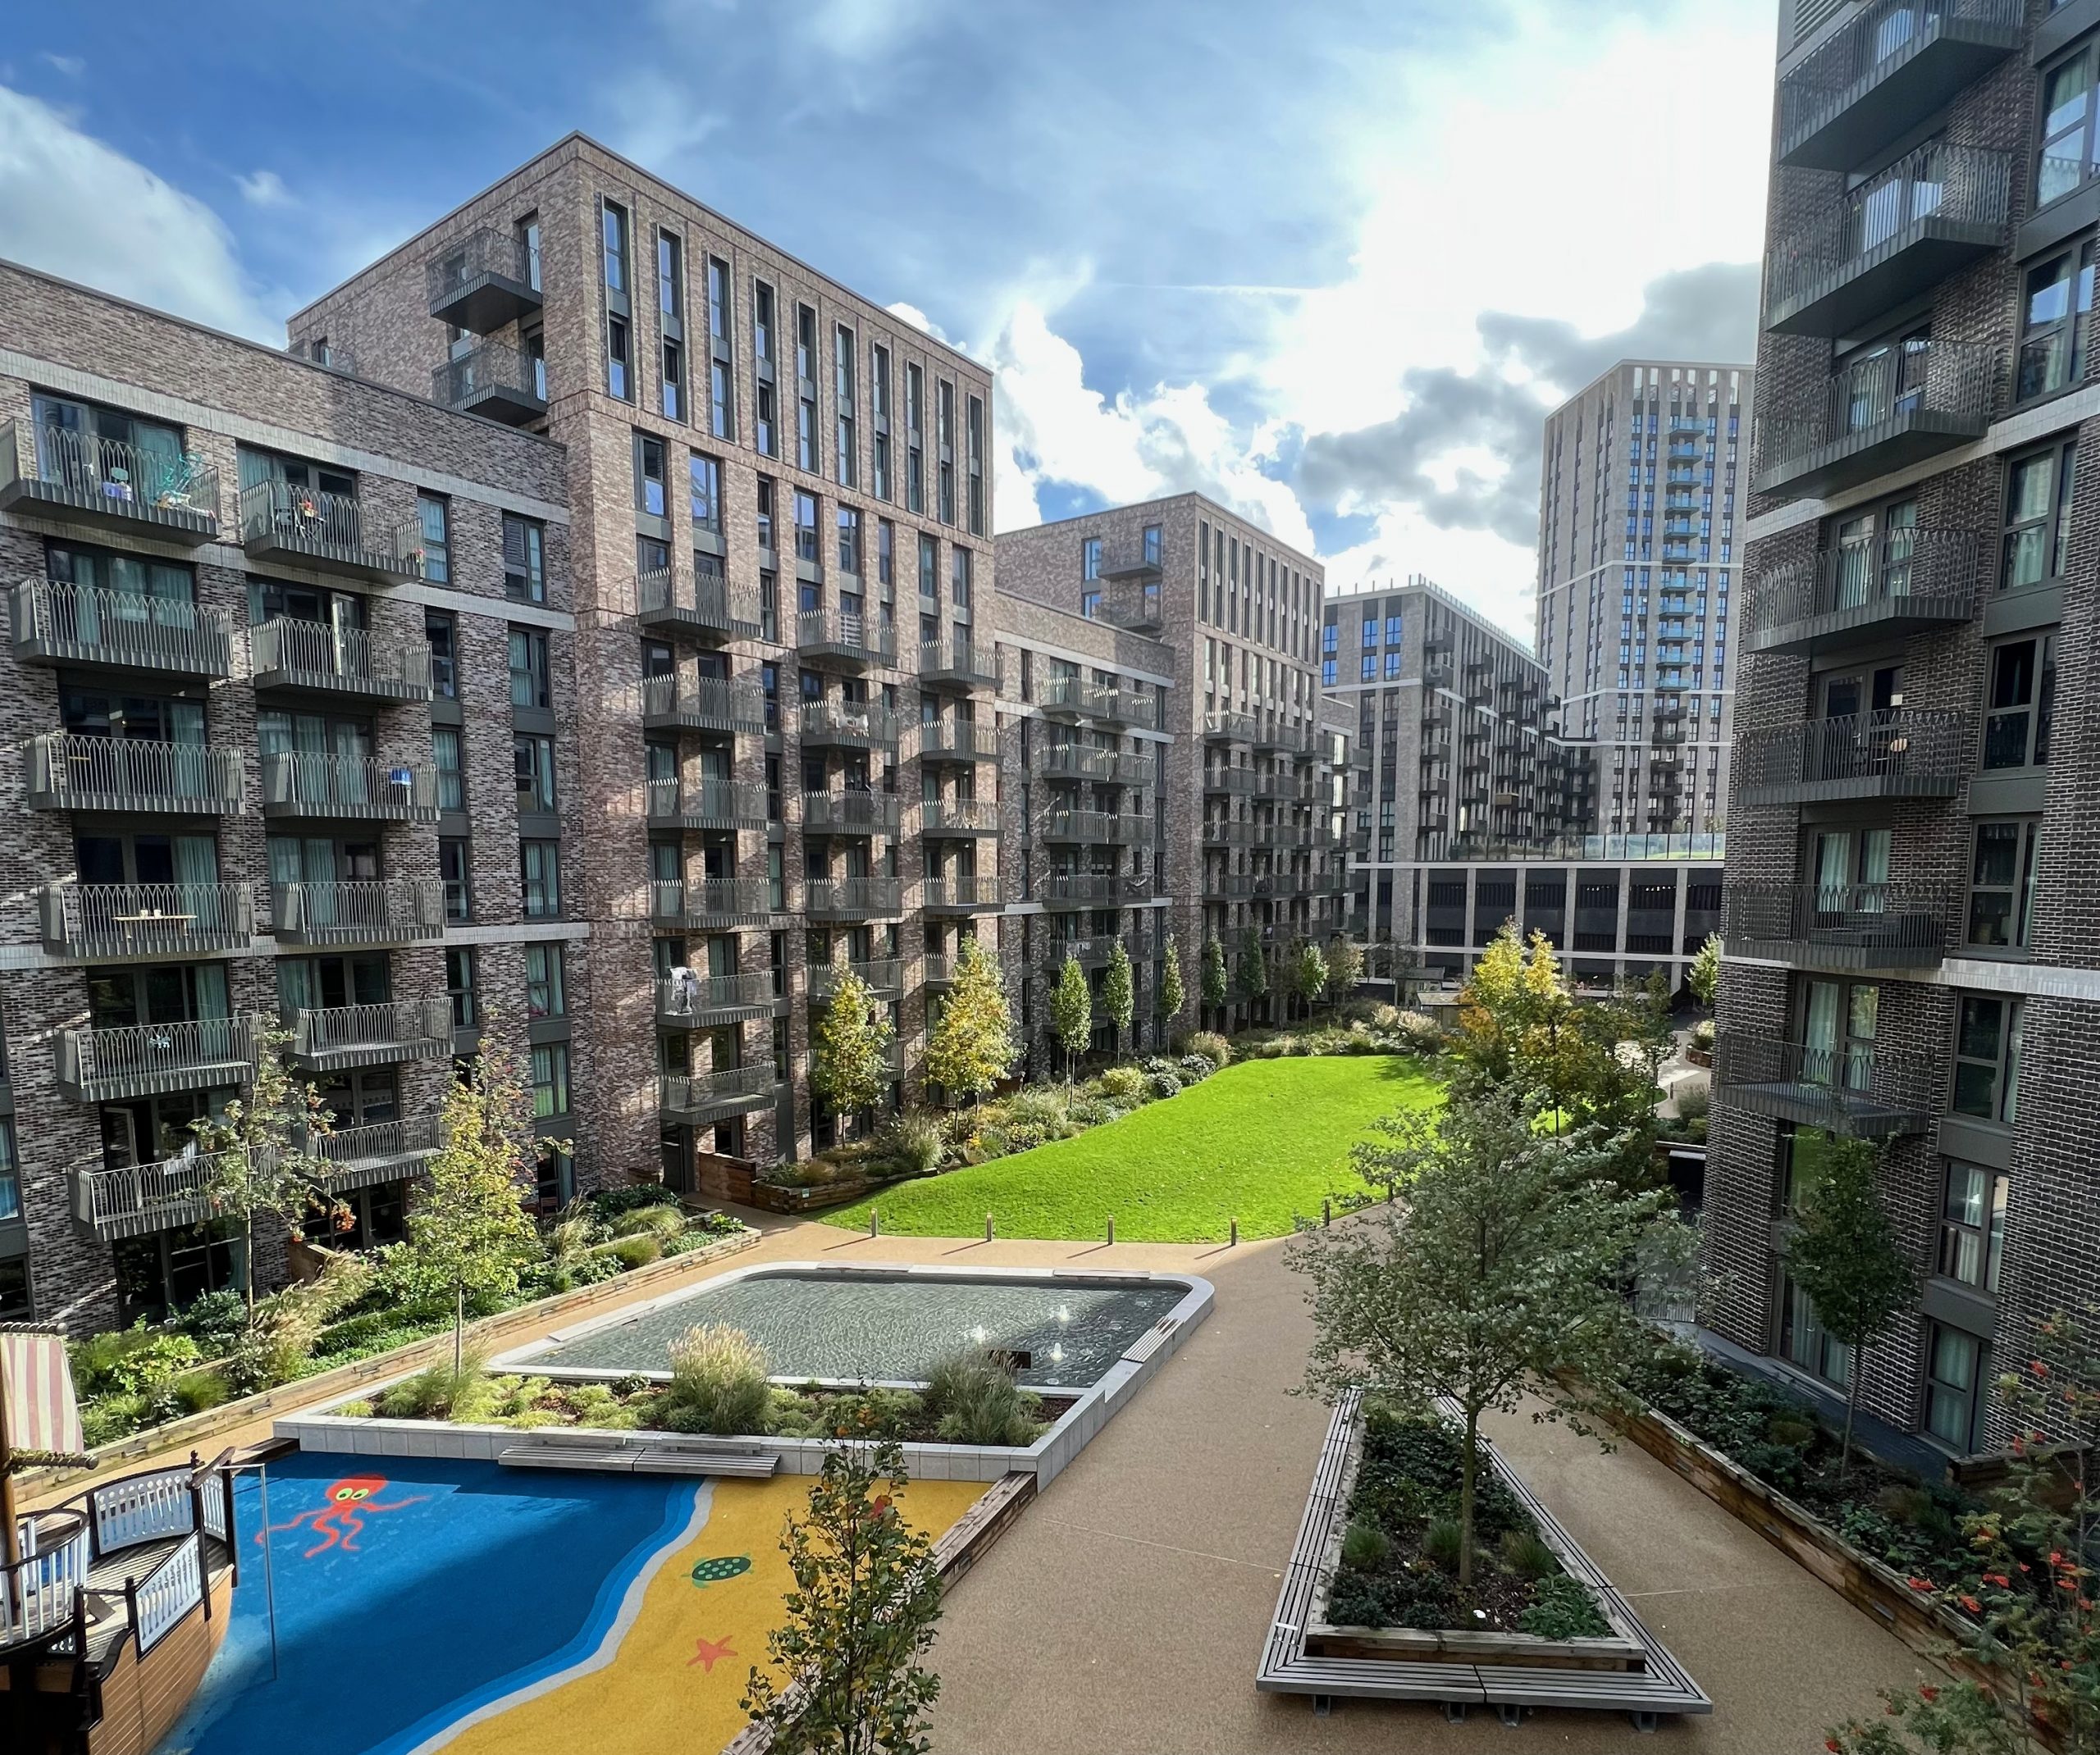 An oasis of green in an urban setting, Canada Gardens offers a new kind of city living in Wembley Park, with a fast trains to Central London.